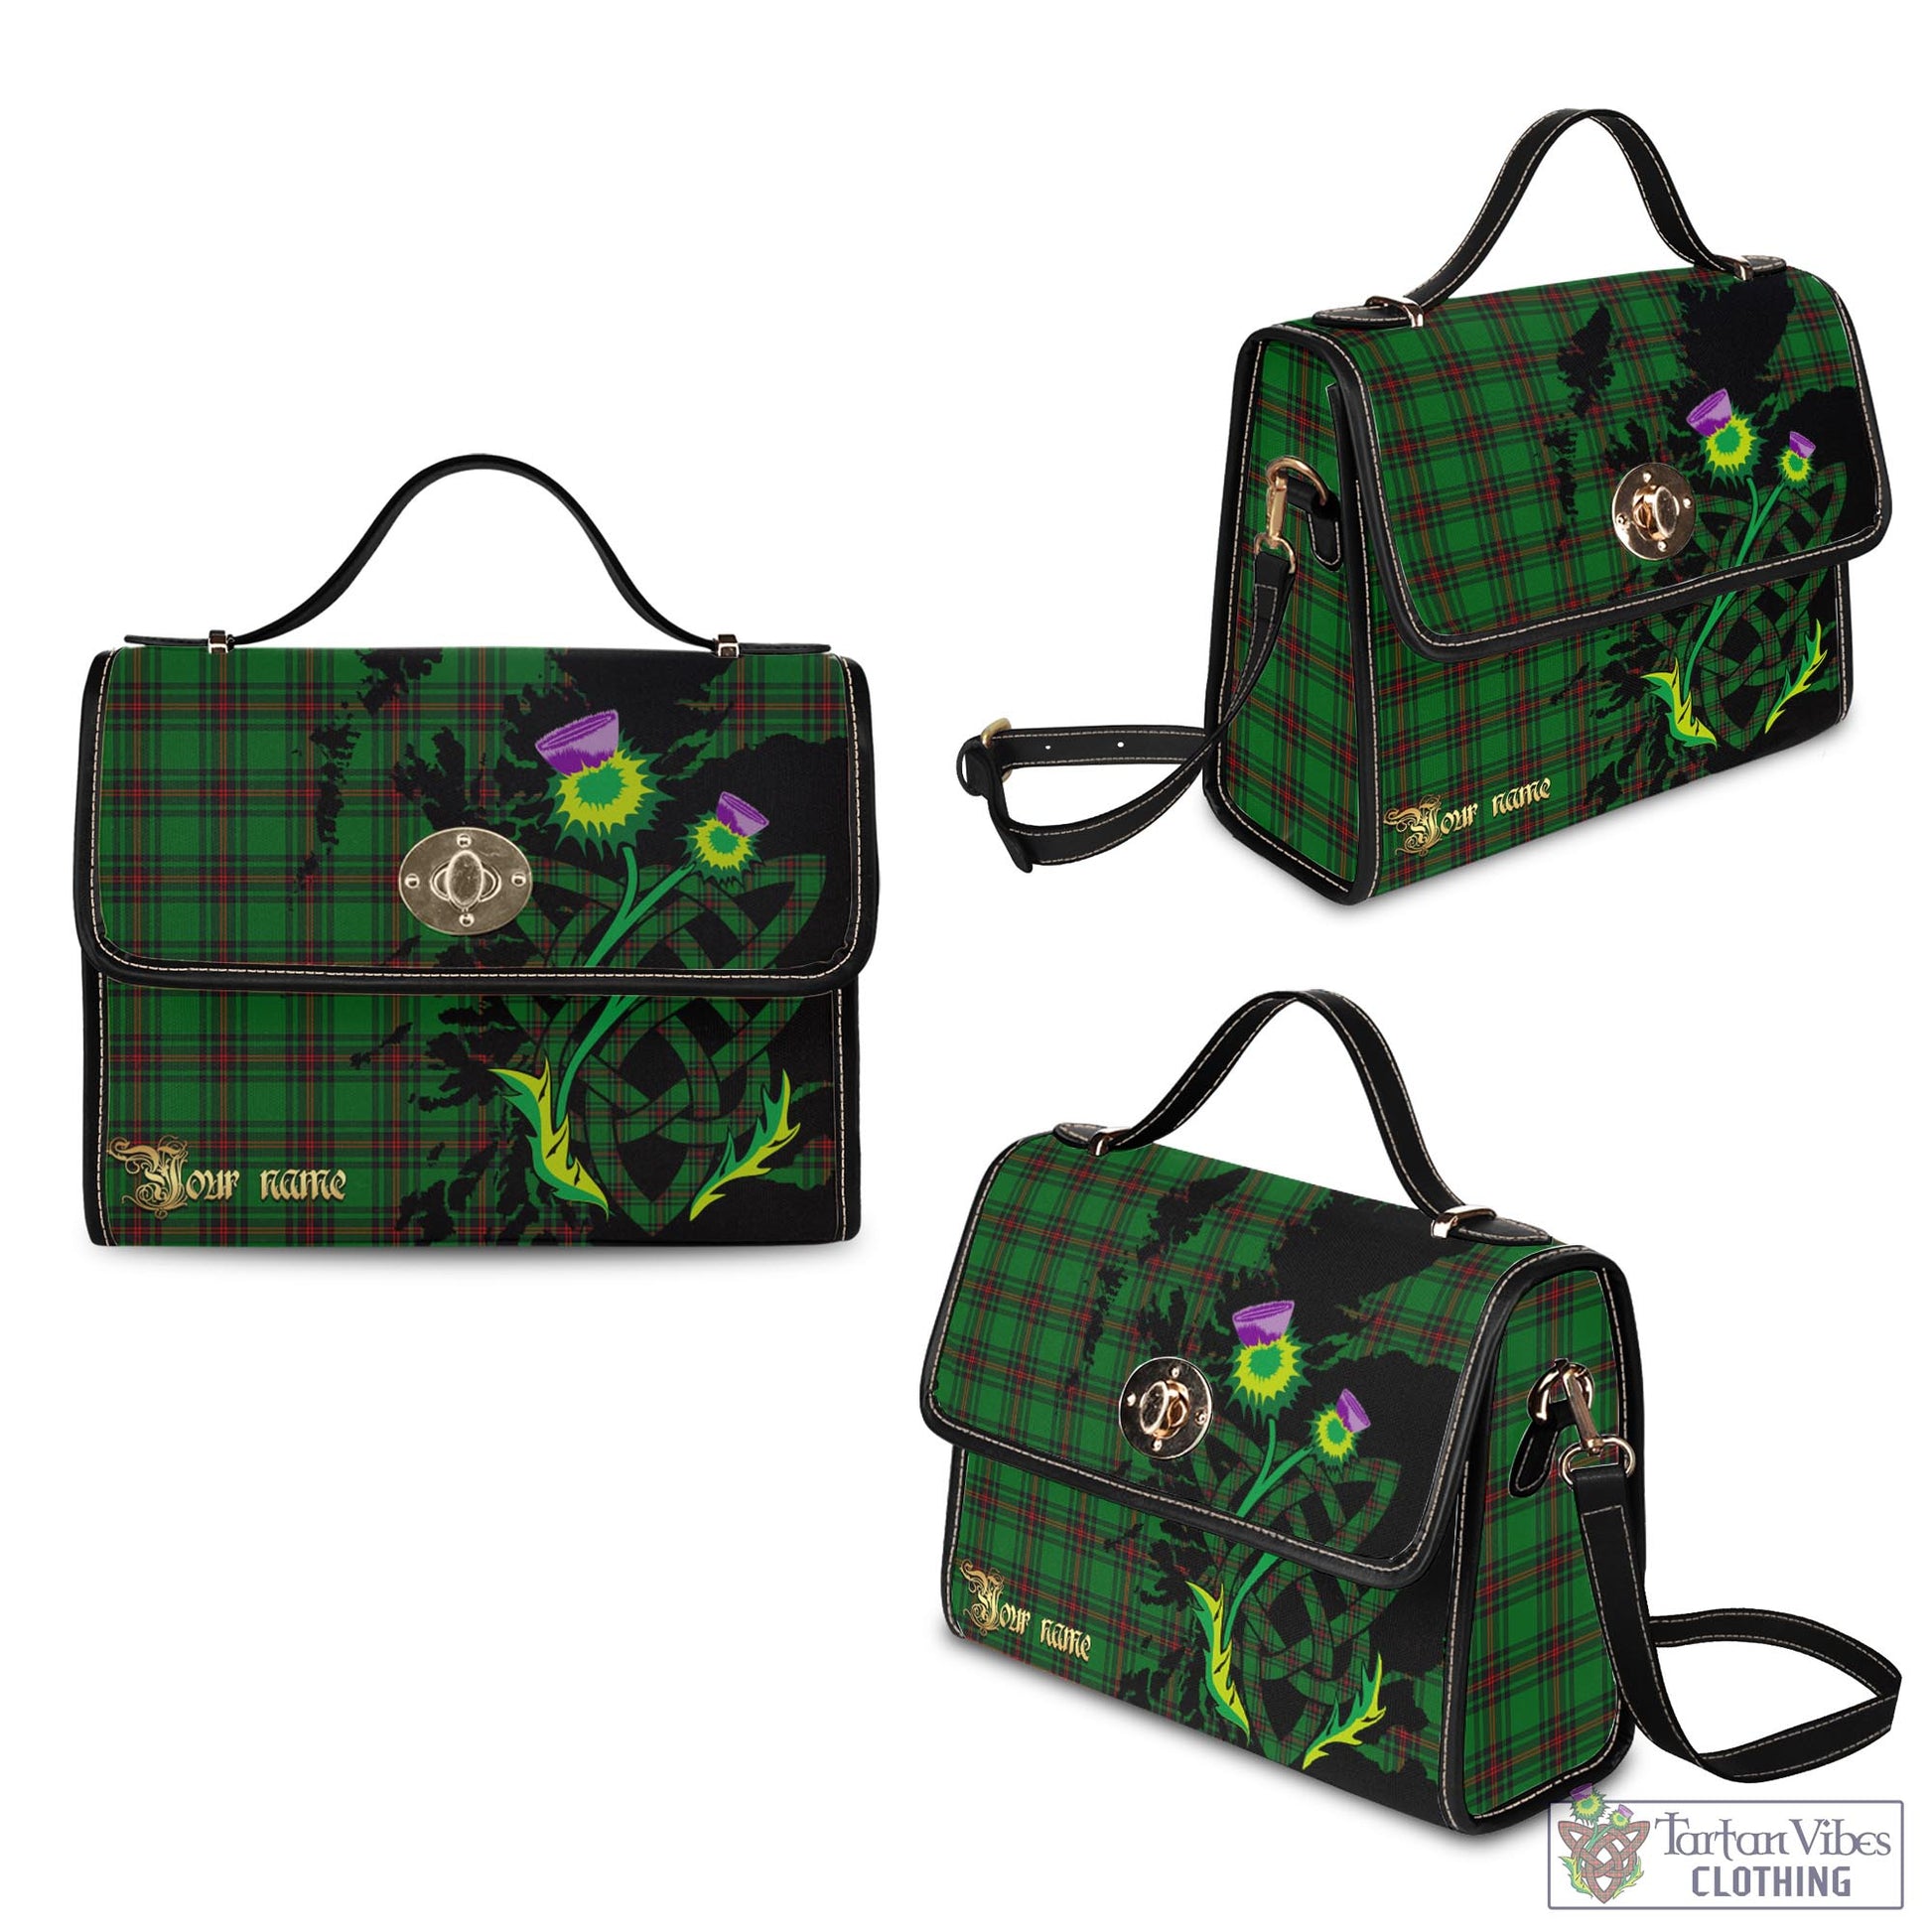 Tartan Vibes Clothing Halkett Tartan Waterproof Canvas Bag with Scotland Map and Thistle Celtic Accents